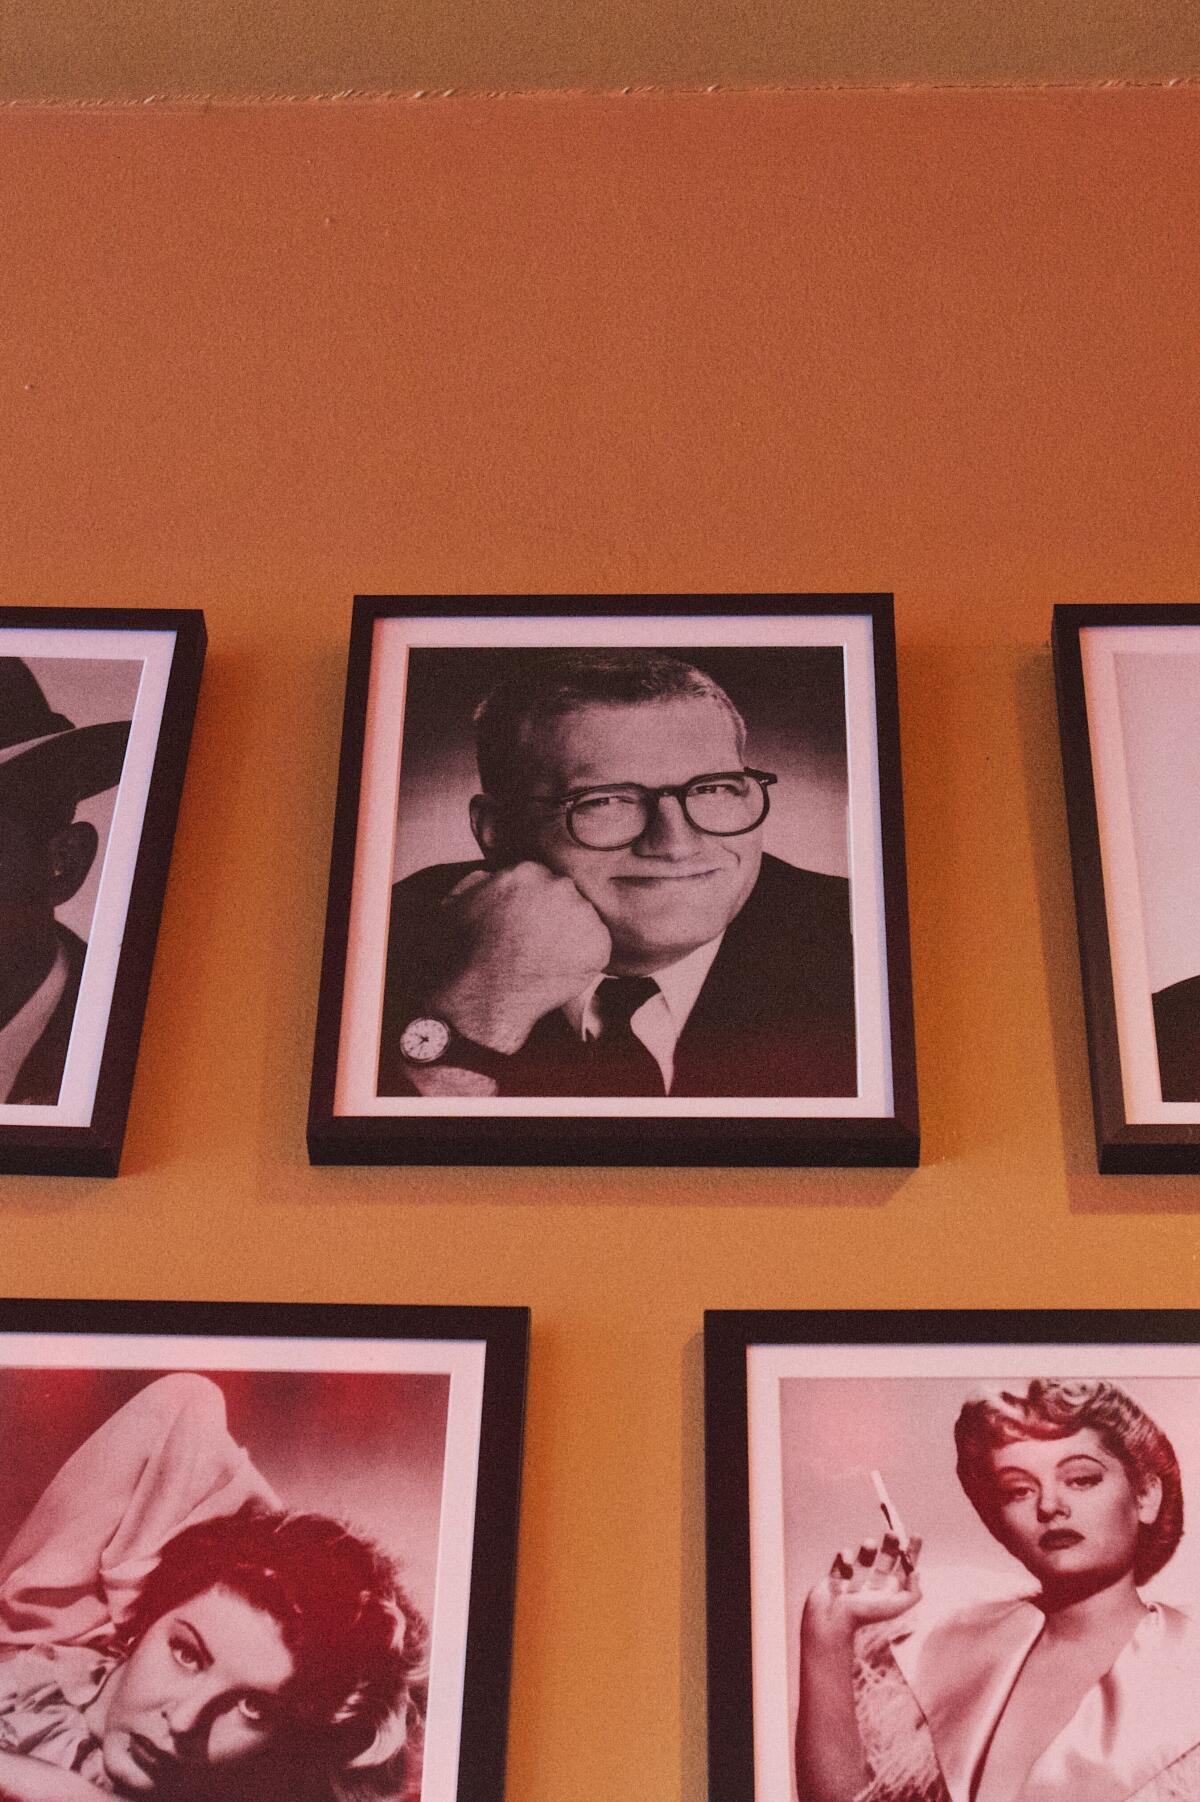 Drew Carey's black-and-white headshot hanging prominently near the entrance to the Burbank location of Bob's Big Boy.